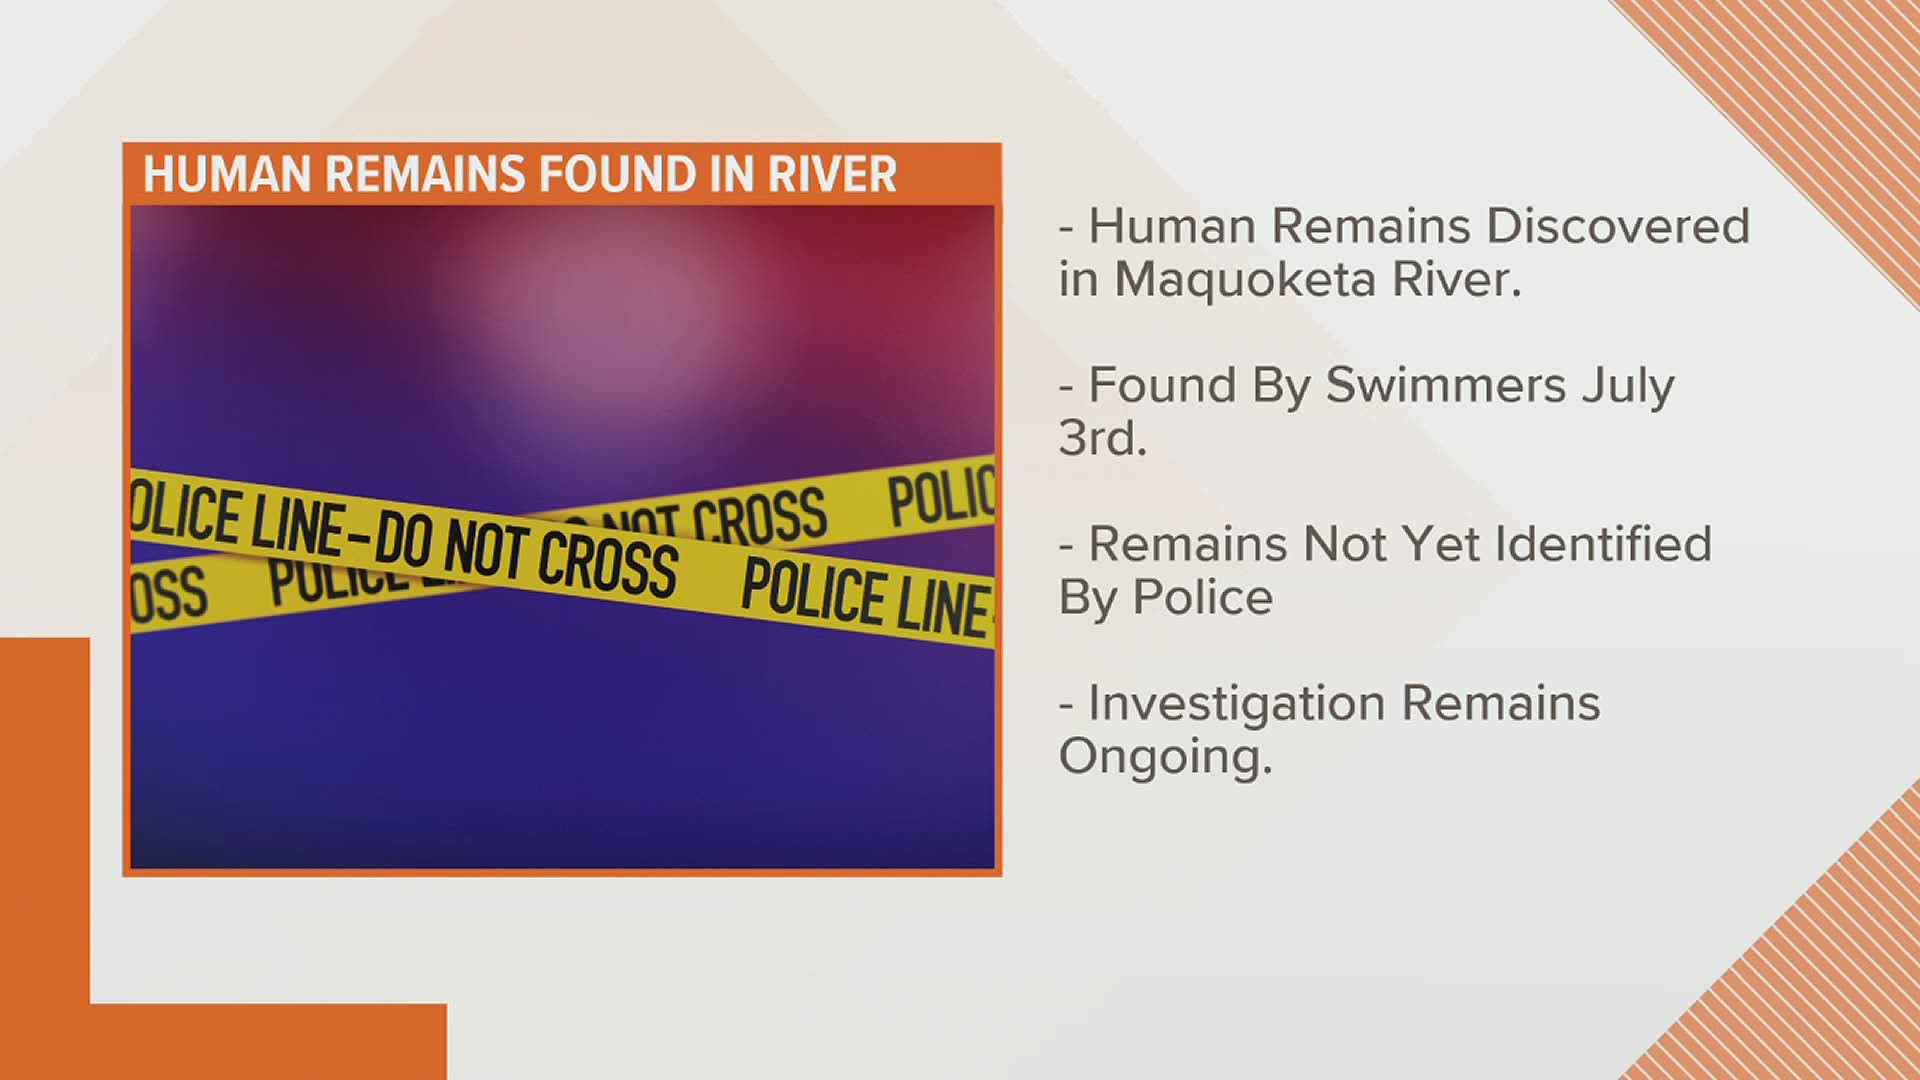 The remains were discovered by people who were floating along the river on Fourth of July weekend.